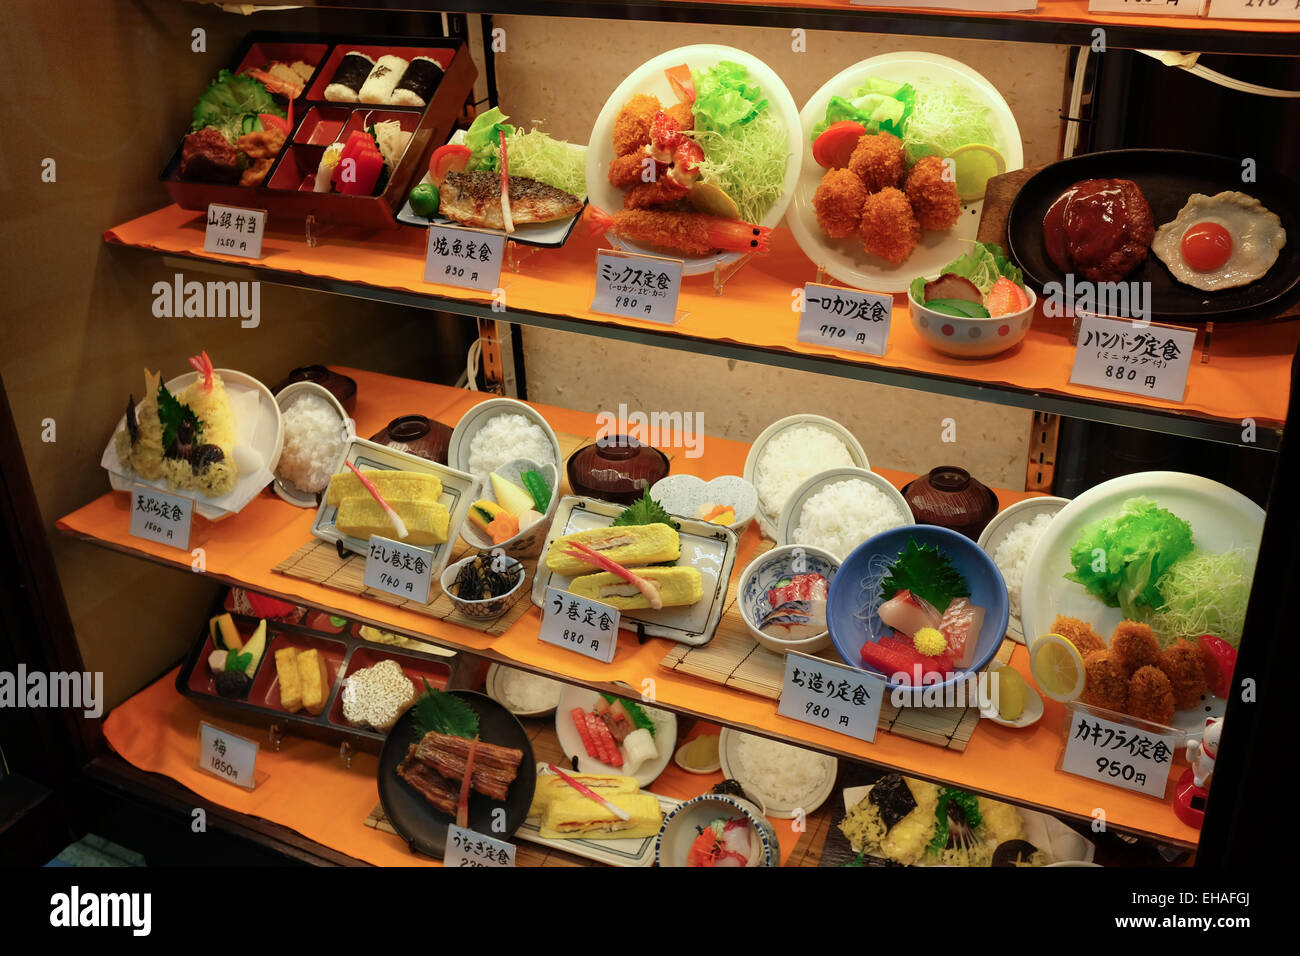 Plastic models on display in the window of a restaurant in Japan showing which dishes are available. Stock Photo